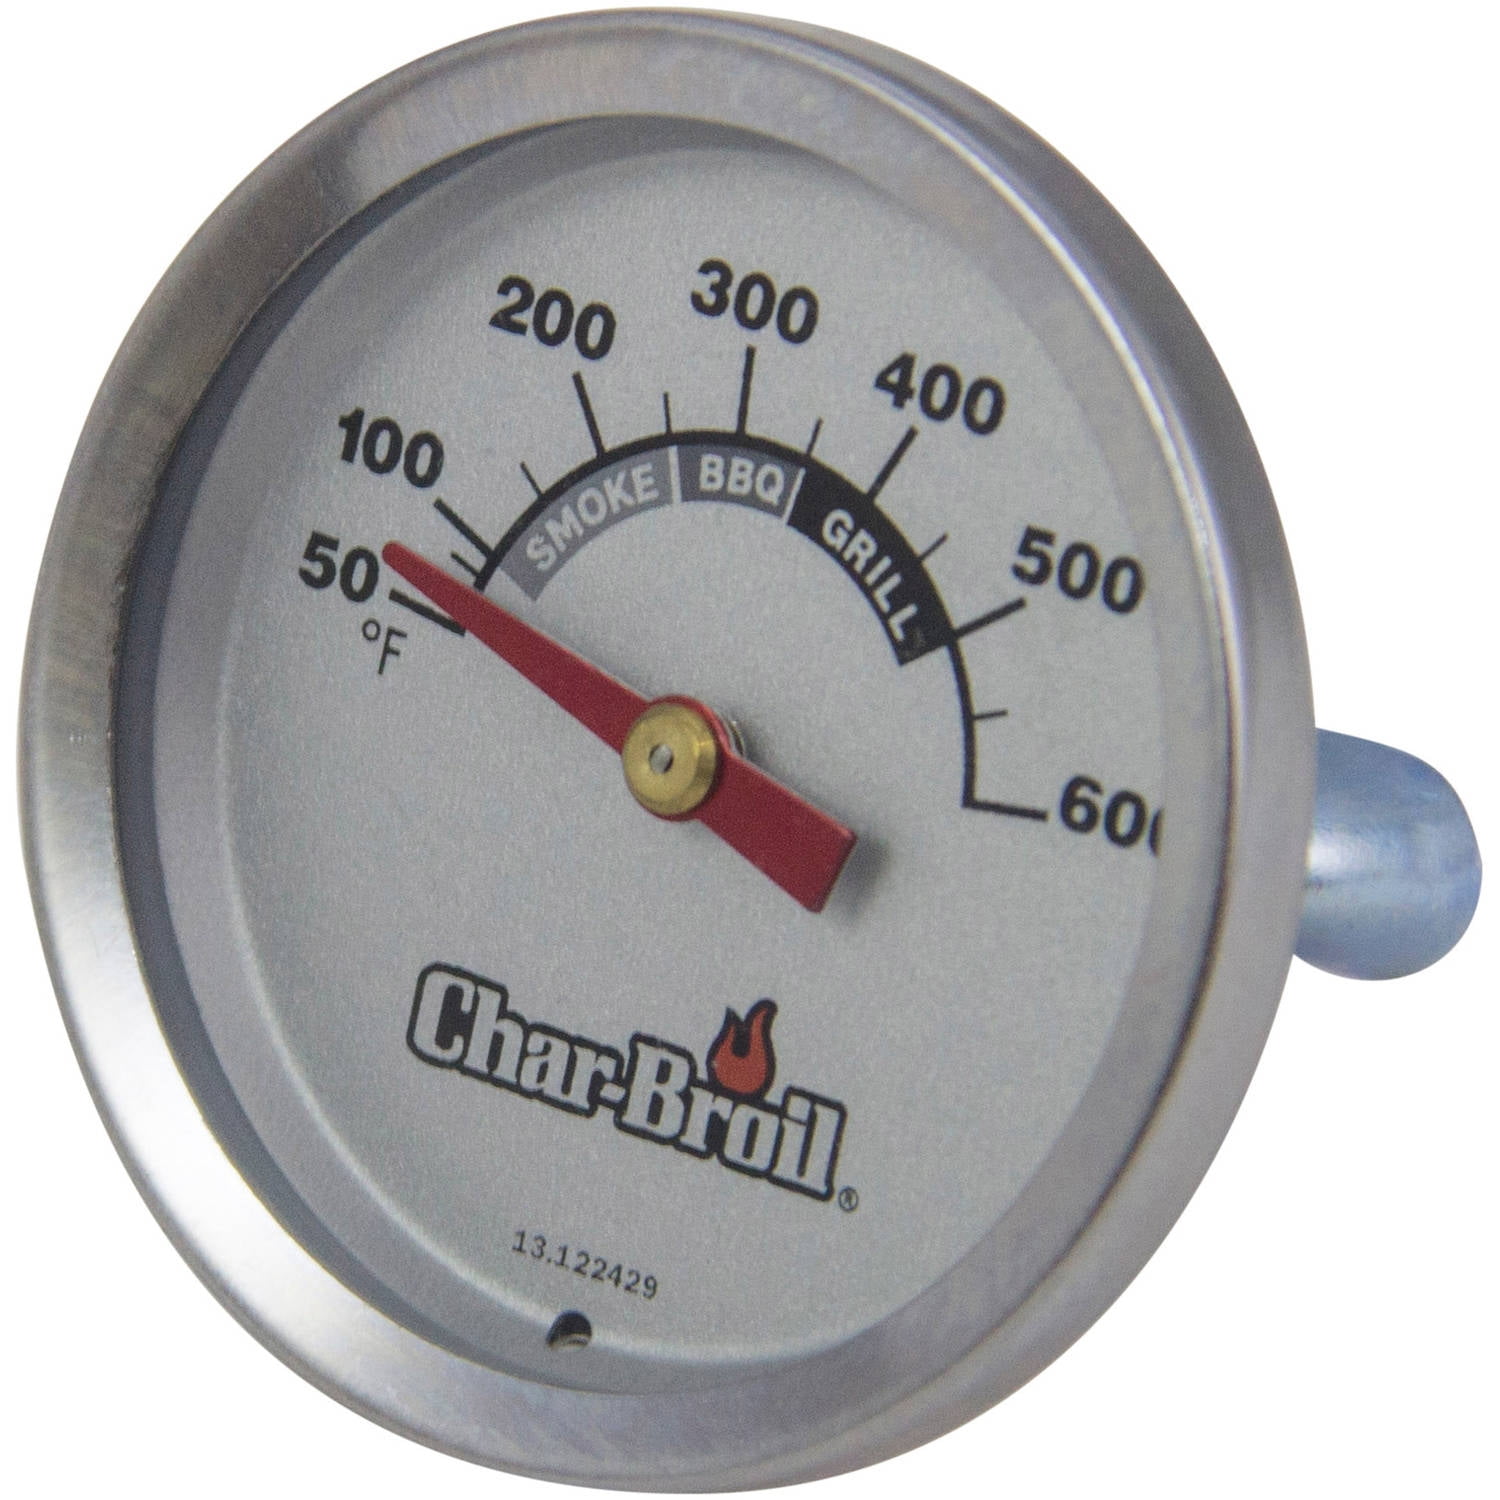 Char-Broil Grill Temperature Gauge Universal Fit for sale online 